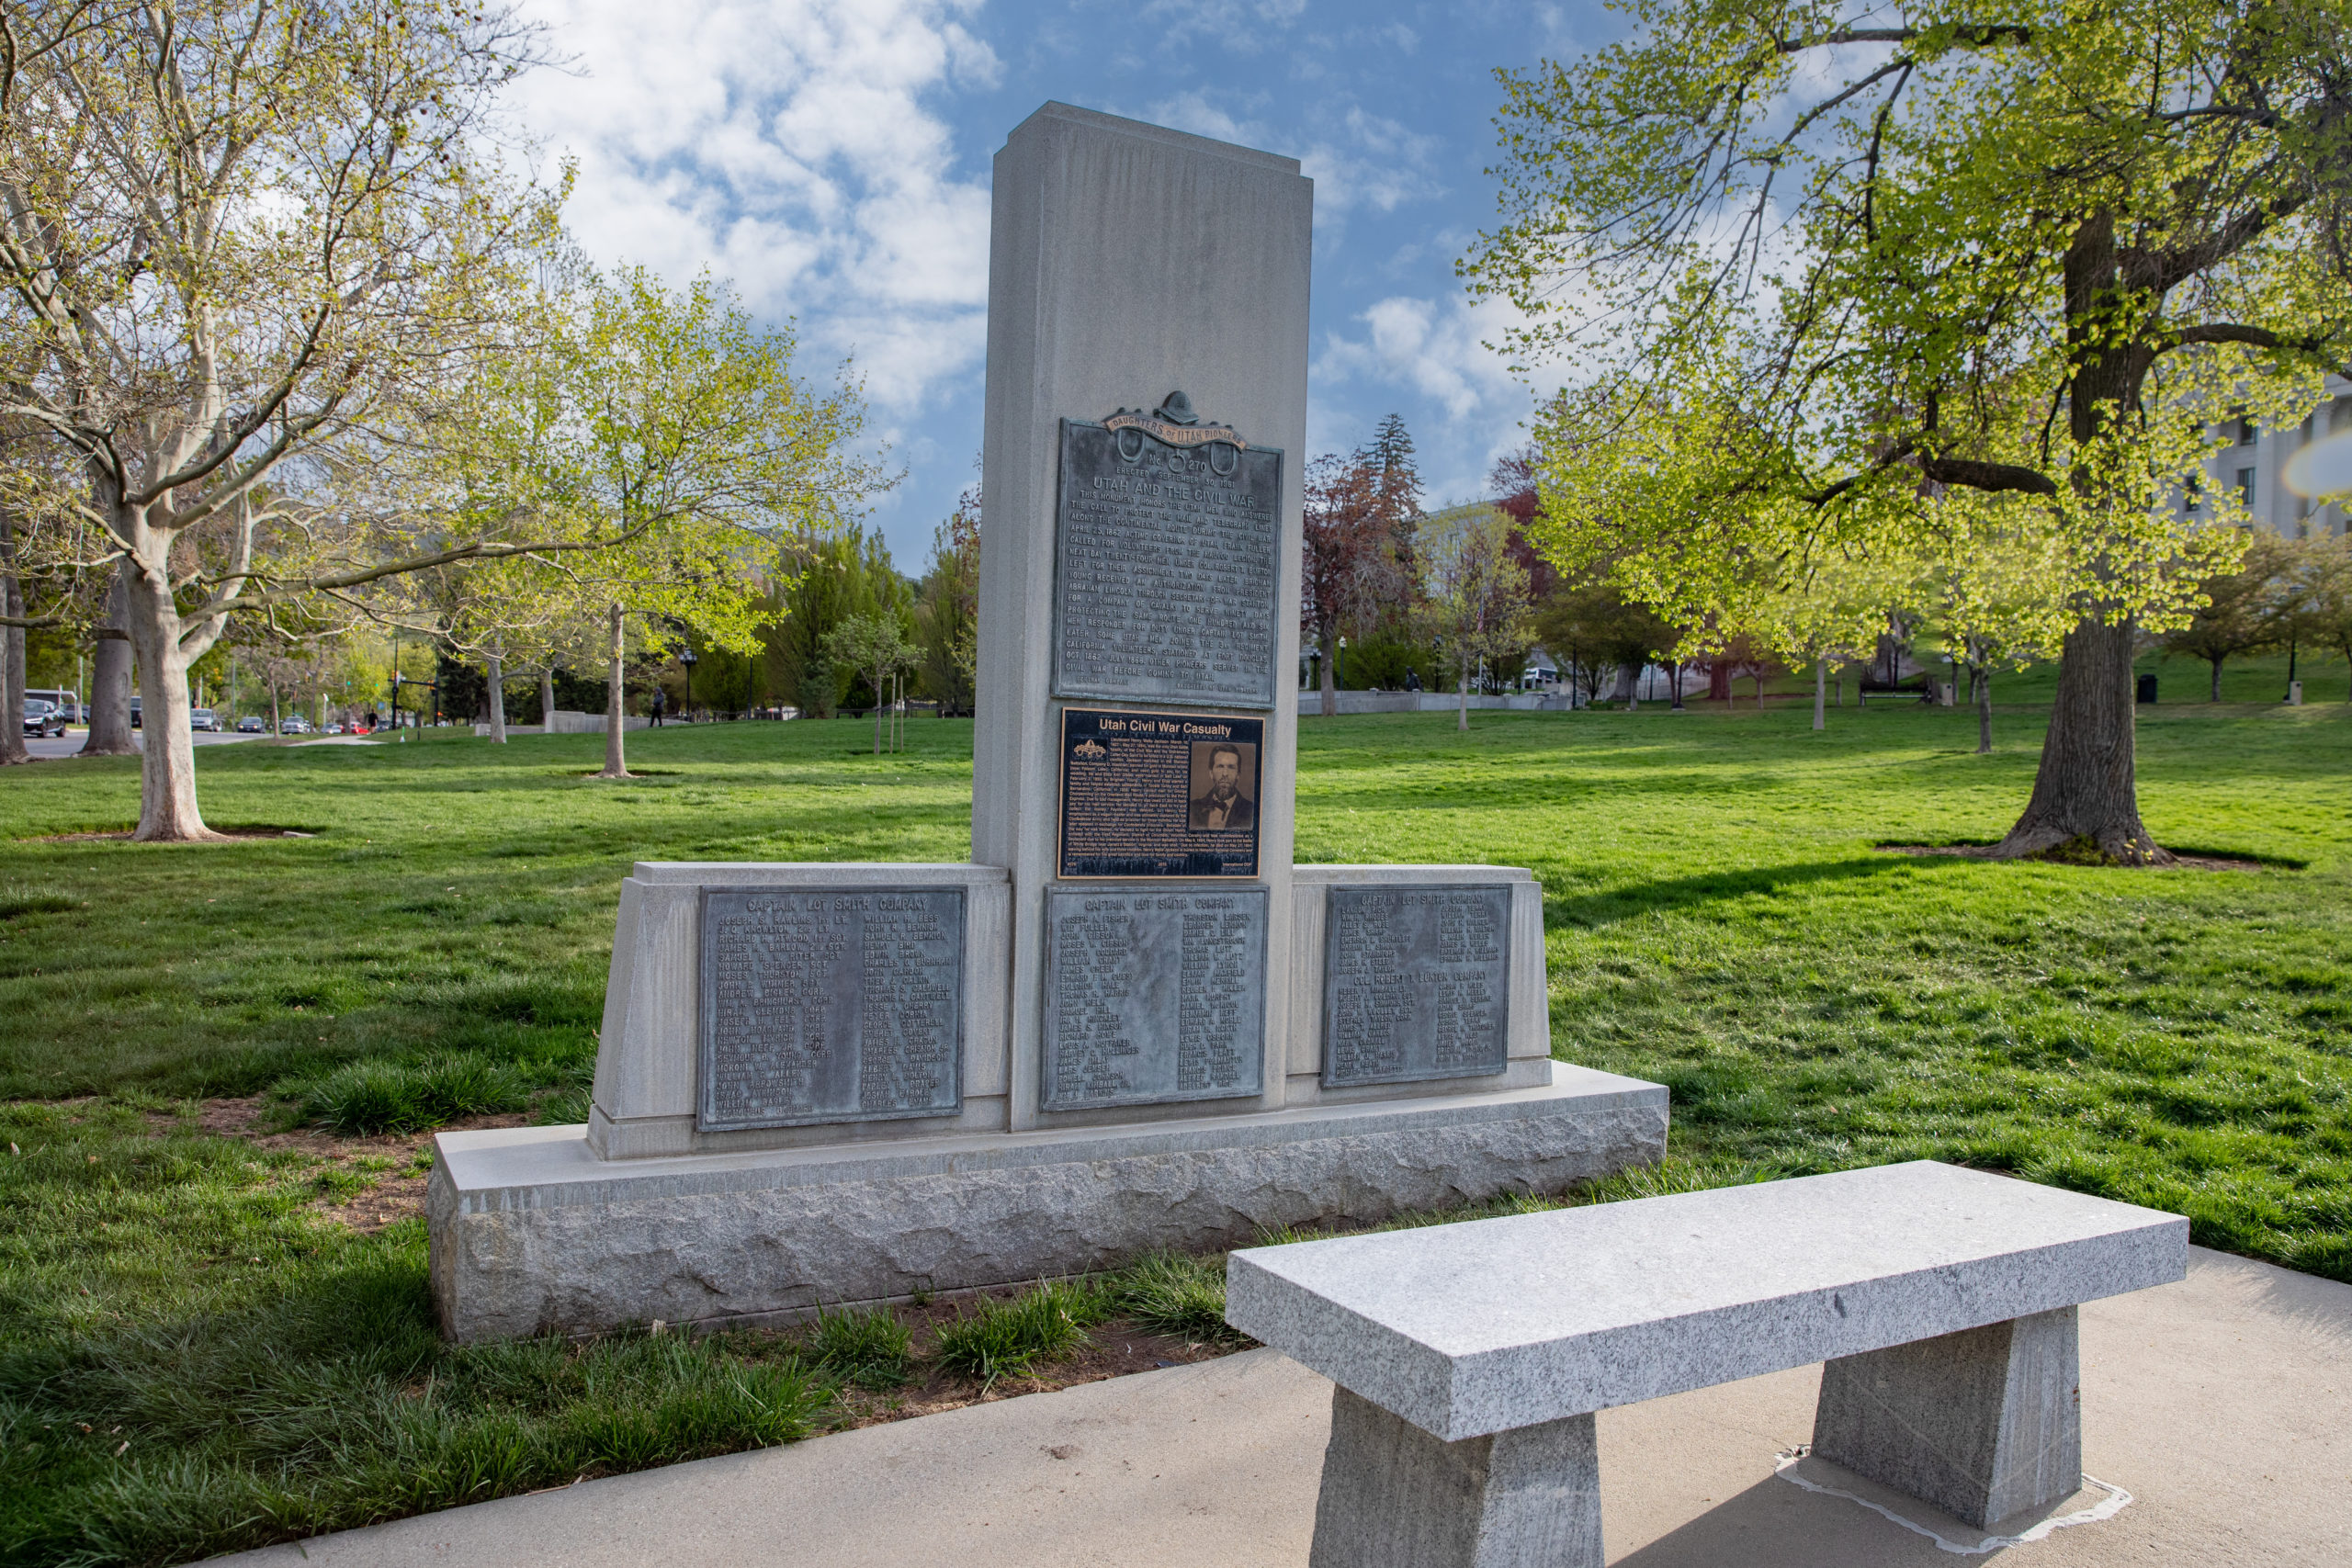 Featured image for “Utah and the Civil War Monument”